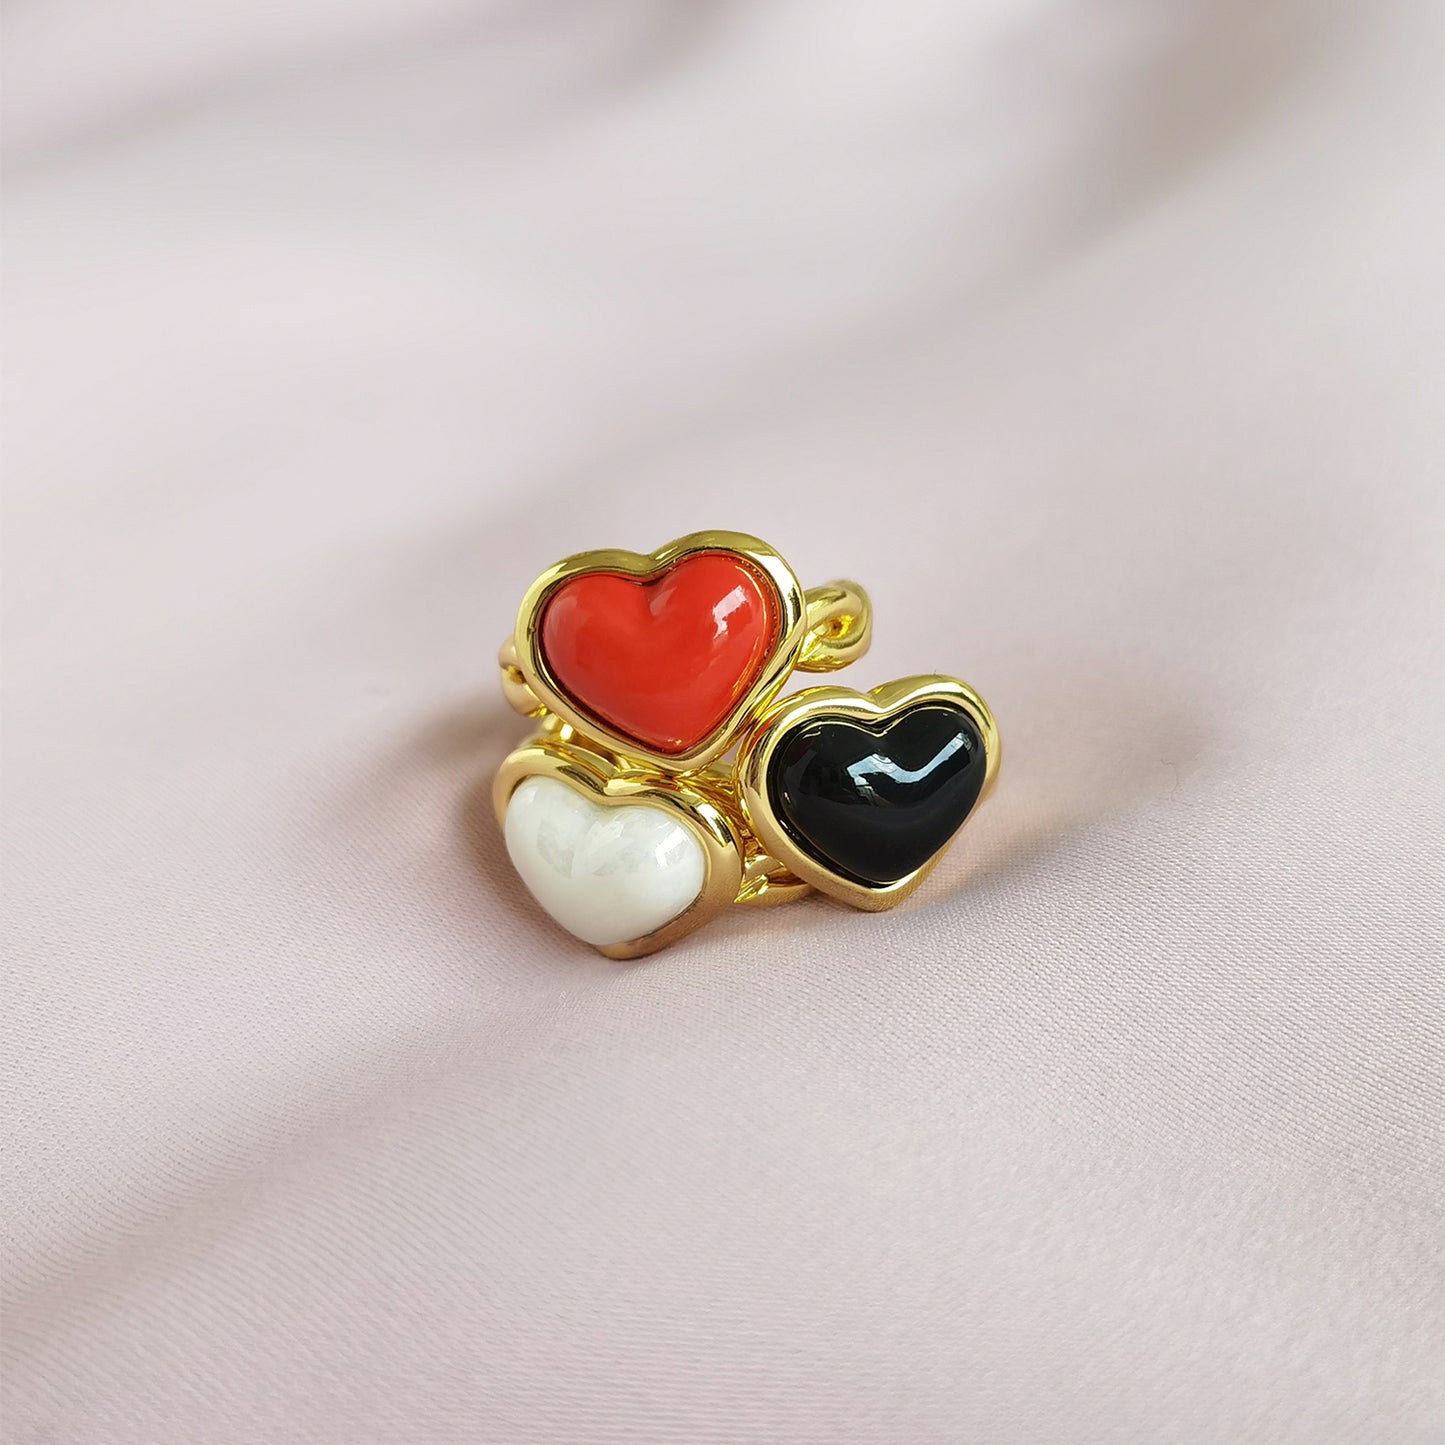 Porcelain Pearly White Heart Braided Ring